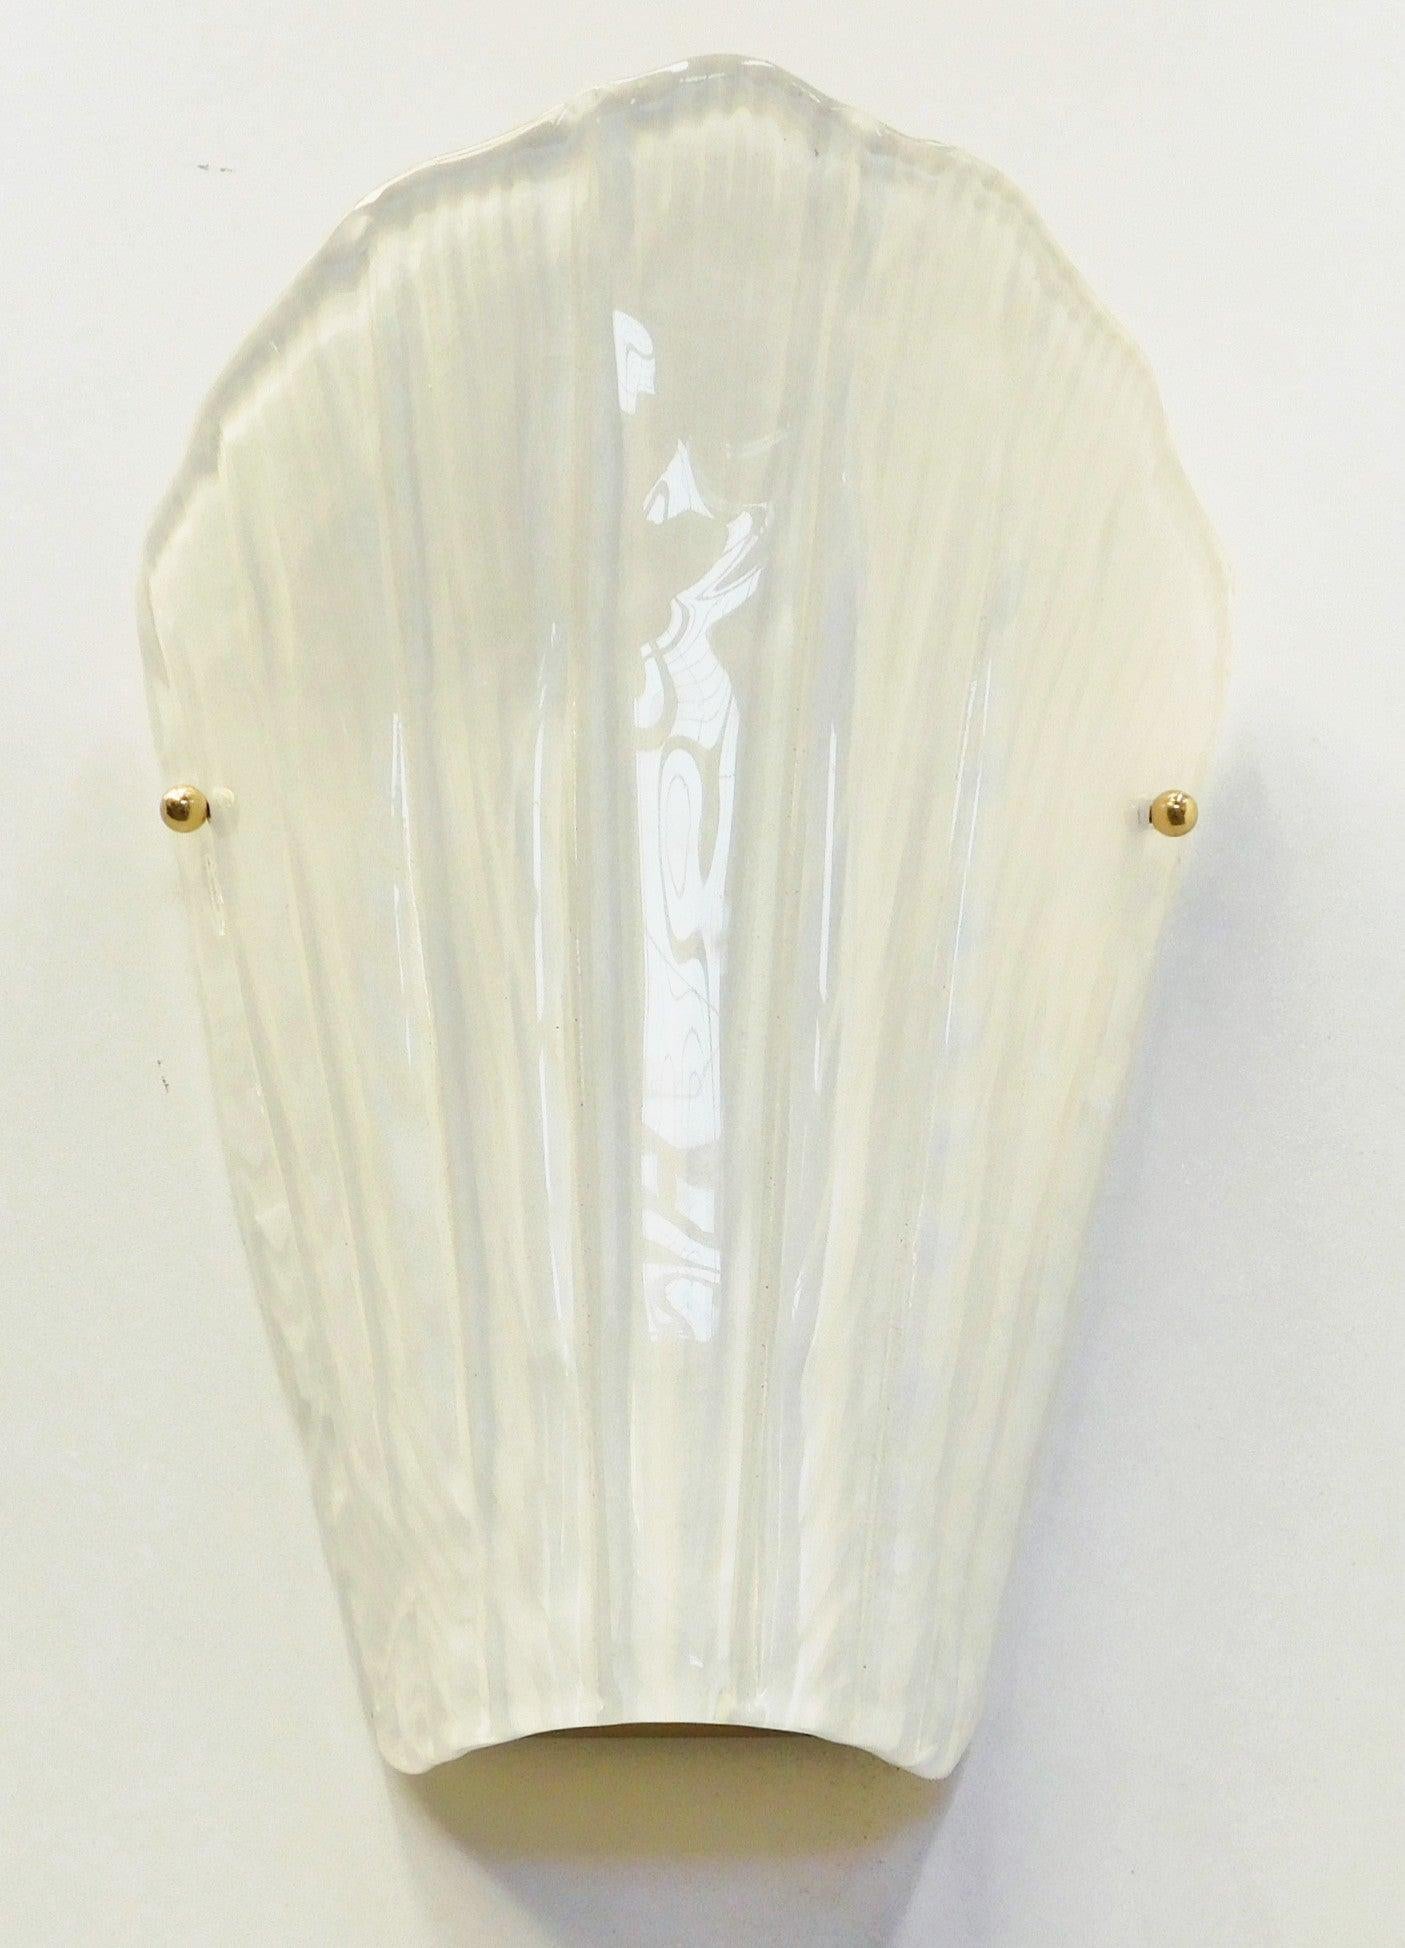 Italian wall light with white Murano glass molded into an artistic shell shape, mounted on polished finish brass frame / Designed by Fabio Bergomi for Fabio Ltd / Made in Italy
1 light / E12 or E14 type / max 40W each
Measures: Height 12.5 inches /